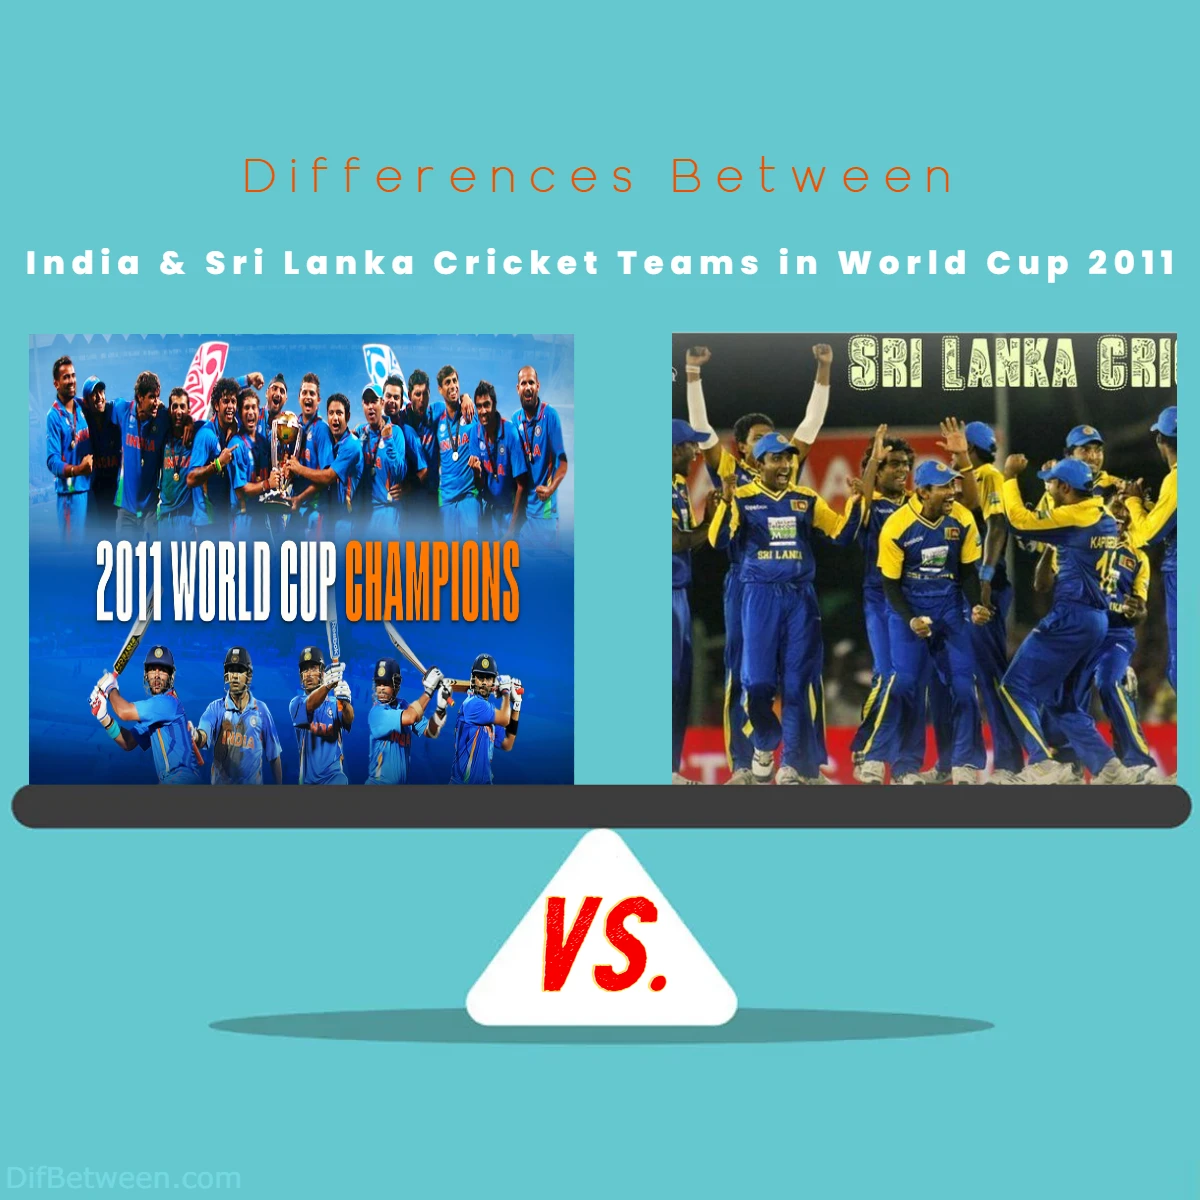 Differences Between India vs Sri Lanka Cricket Teams in World Cup 2011